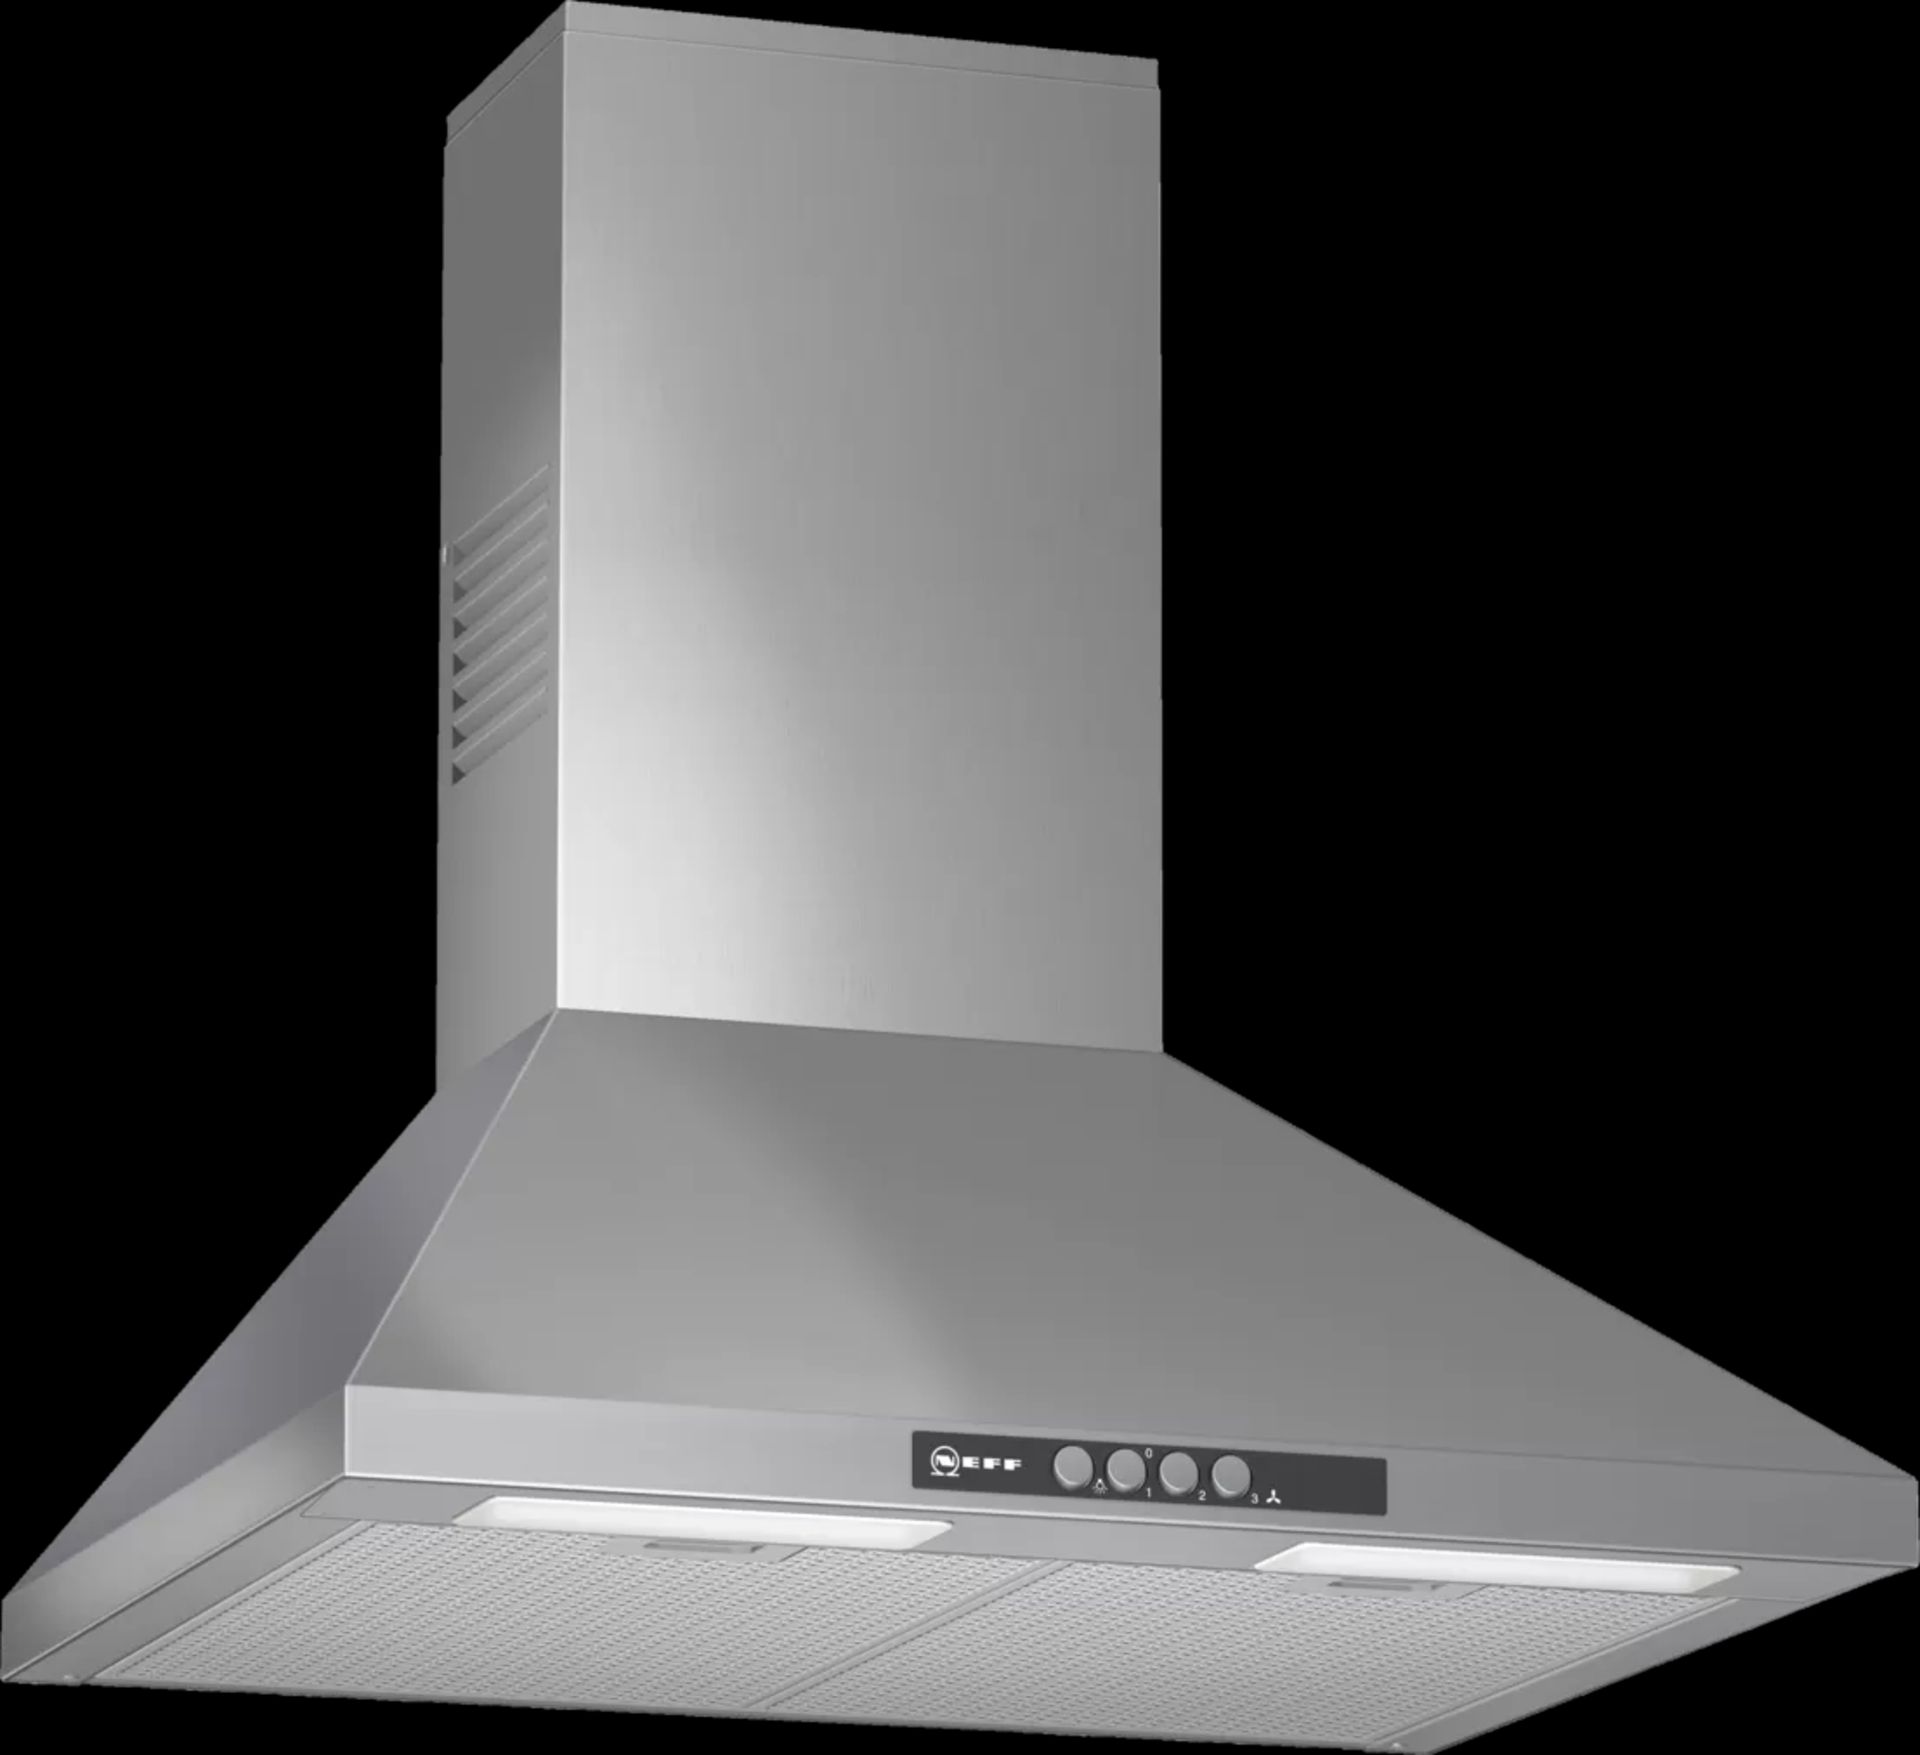 Brand New Boxed Neff D66B21N0GB Stainless Steel Chimney Cooker Hood RRP £299